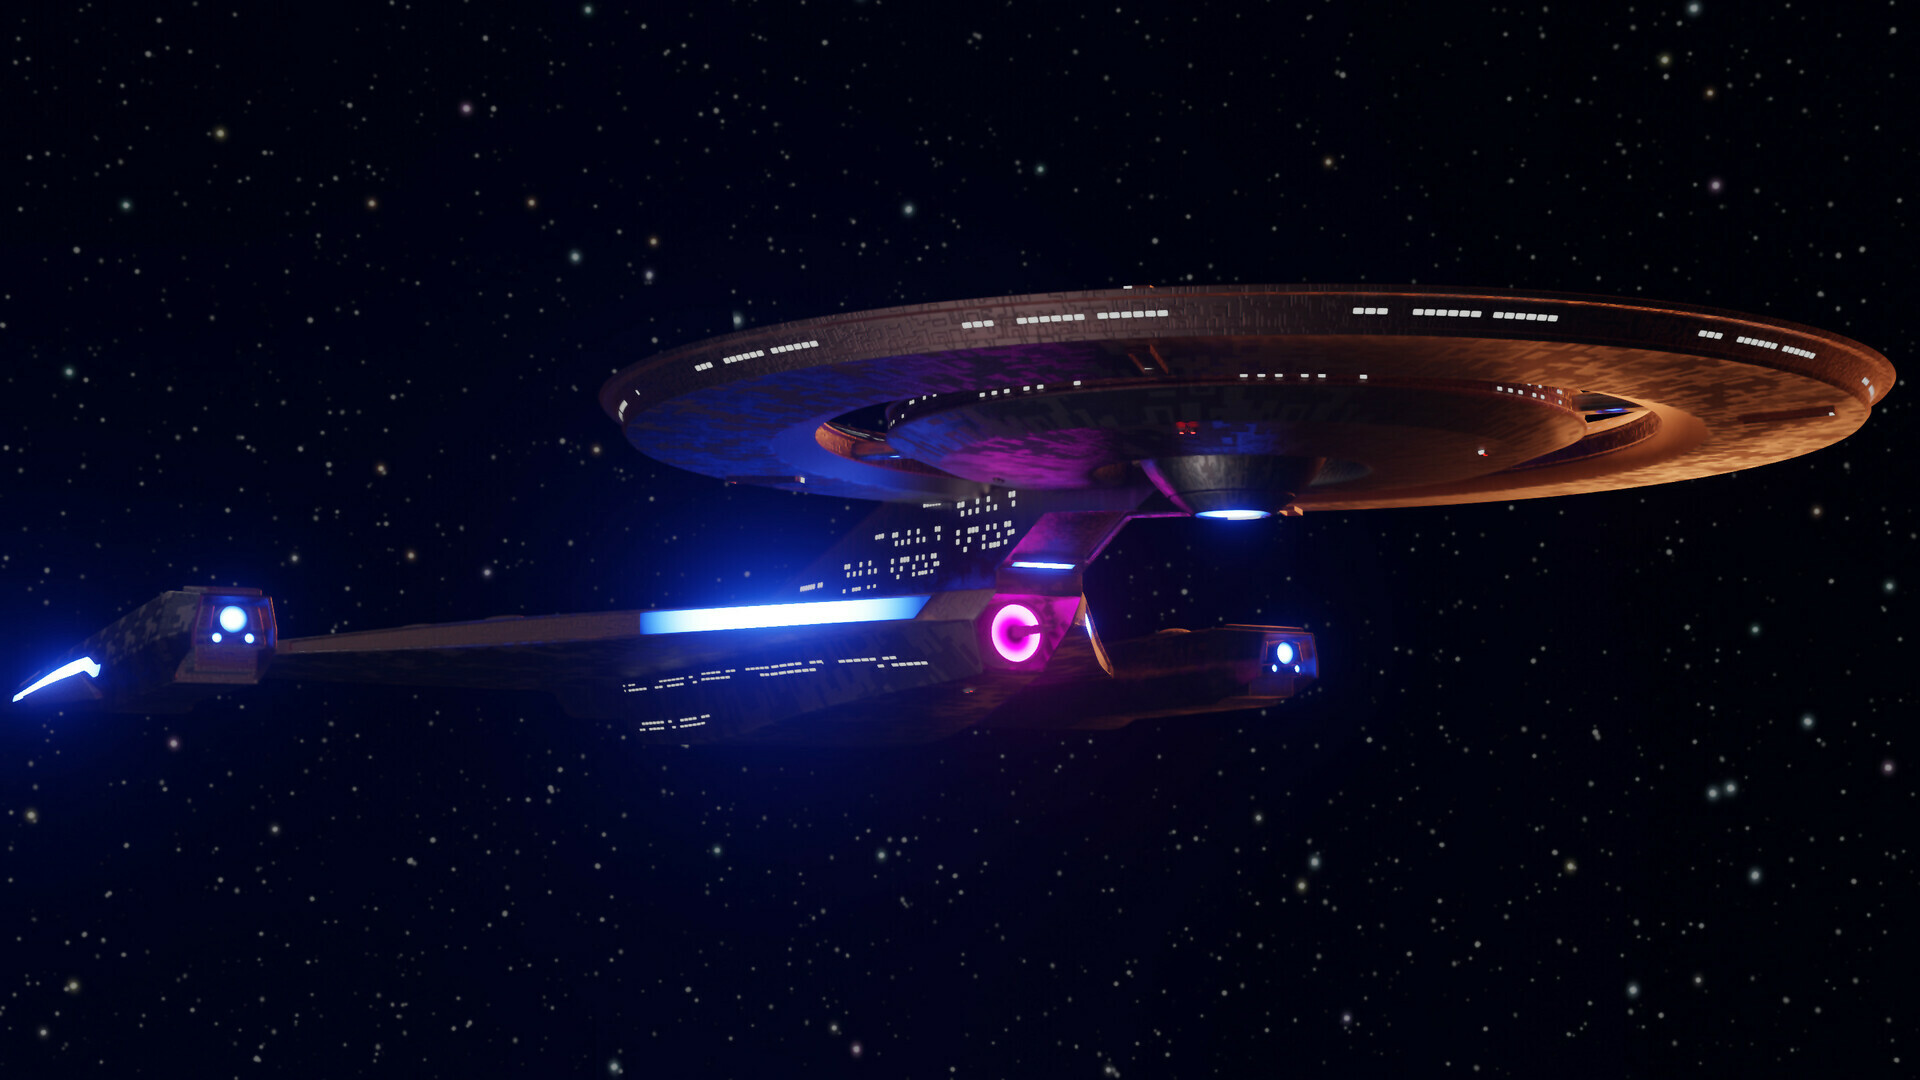 Star Trek: The space-borne peacekeeping, exploratory, and humanitarian armada of the United Federation of Planets. 1920x1080 Full HD Wallpaper.